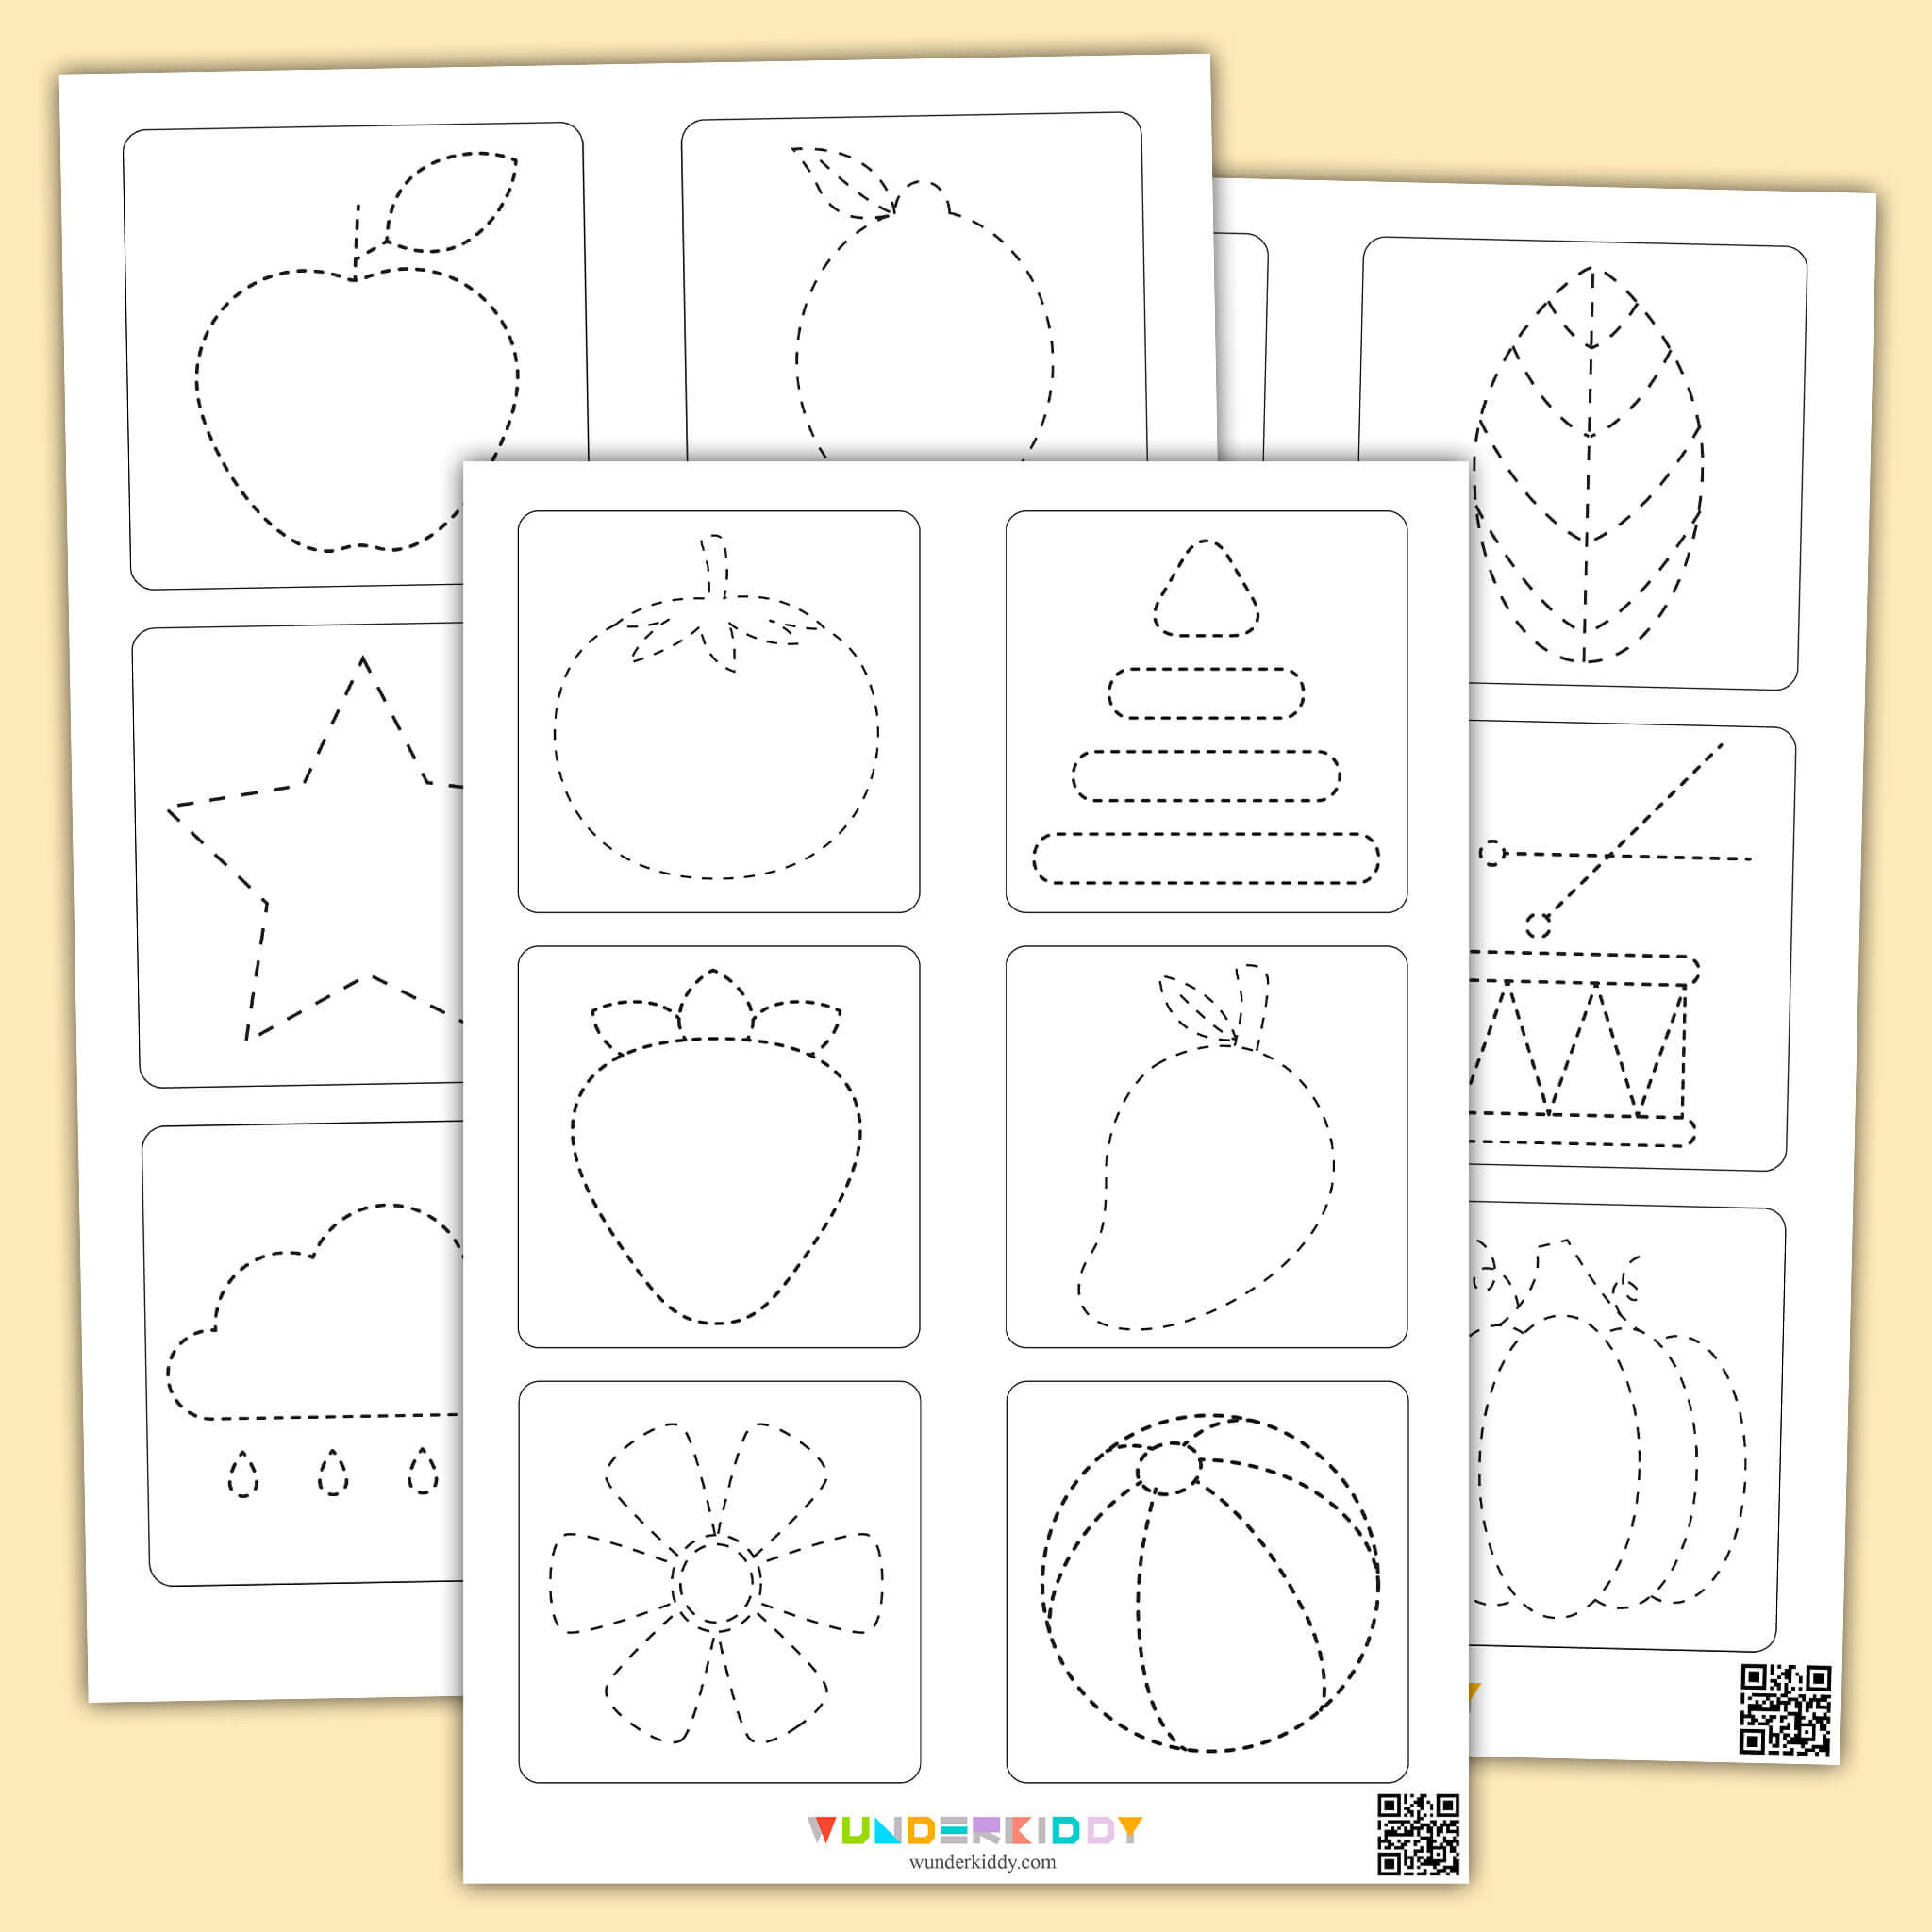 Trace and Color Worksheet